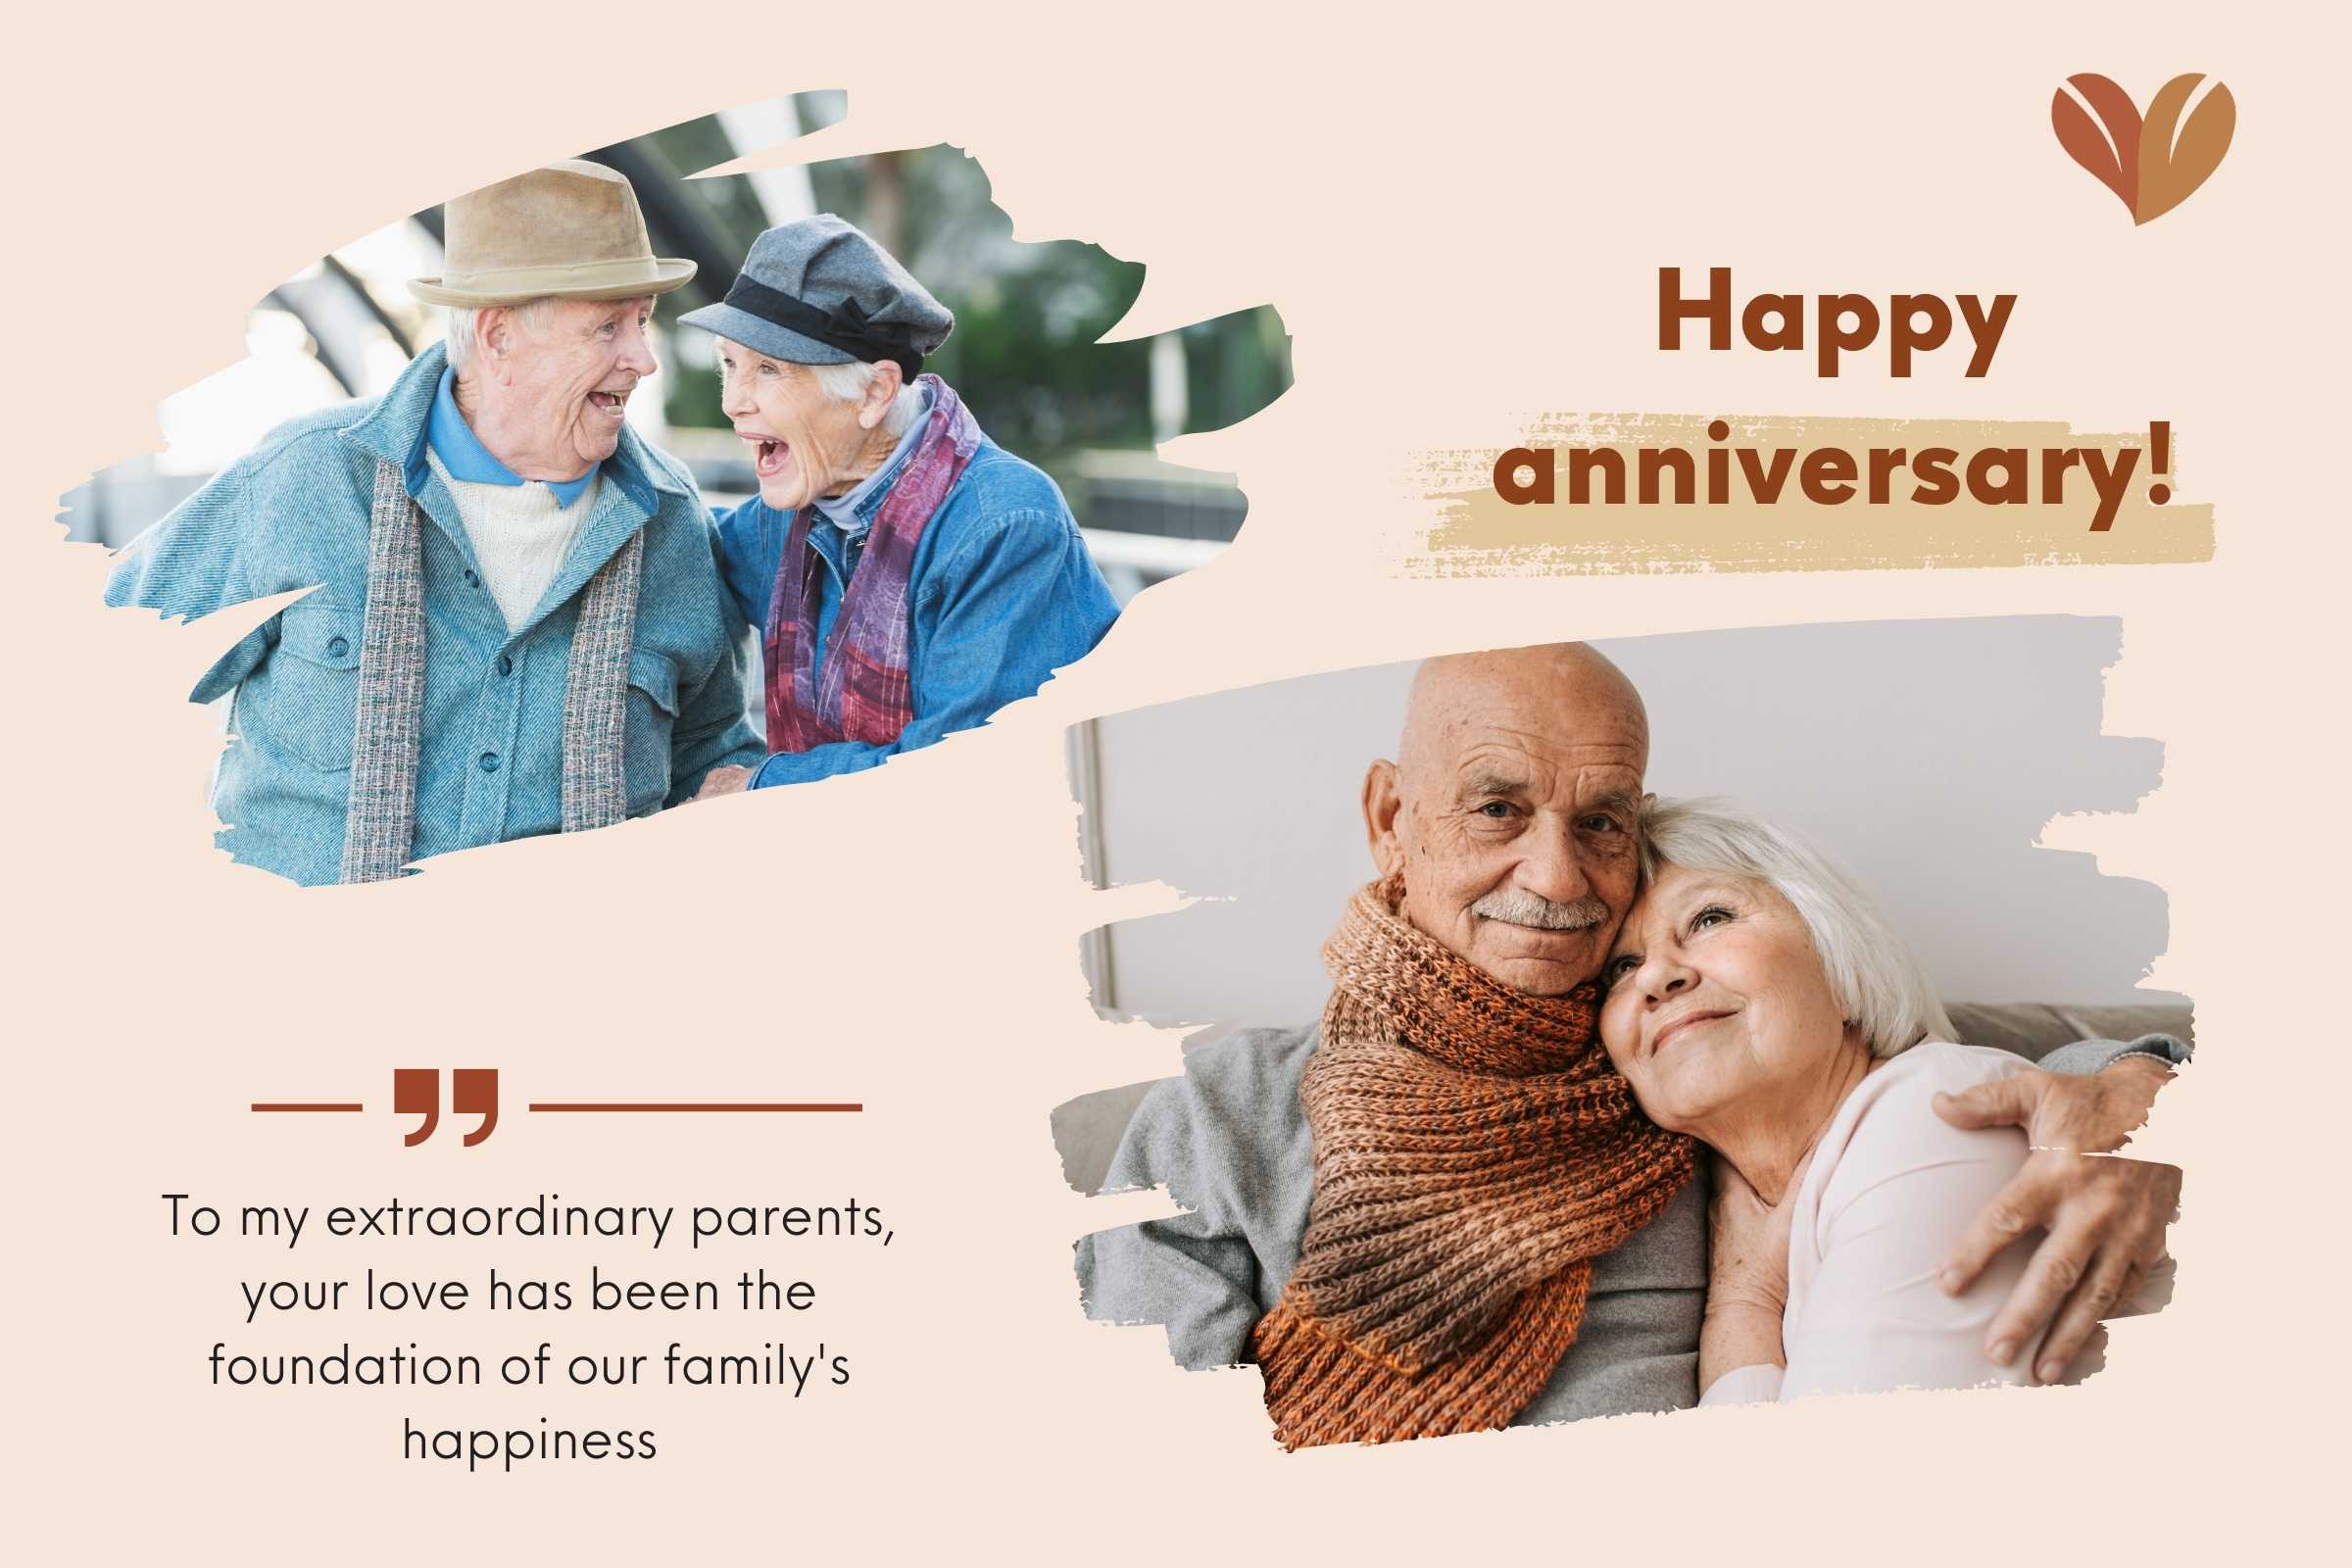 Warmth and joy radiate in this picture, fitting anniversary quotes for parents.